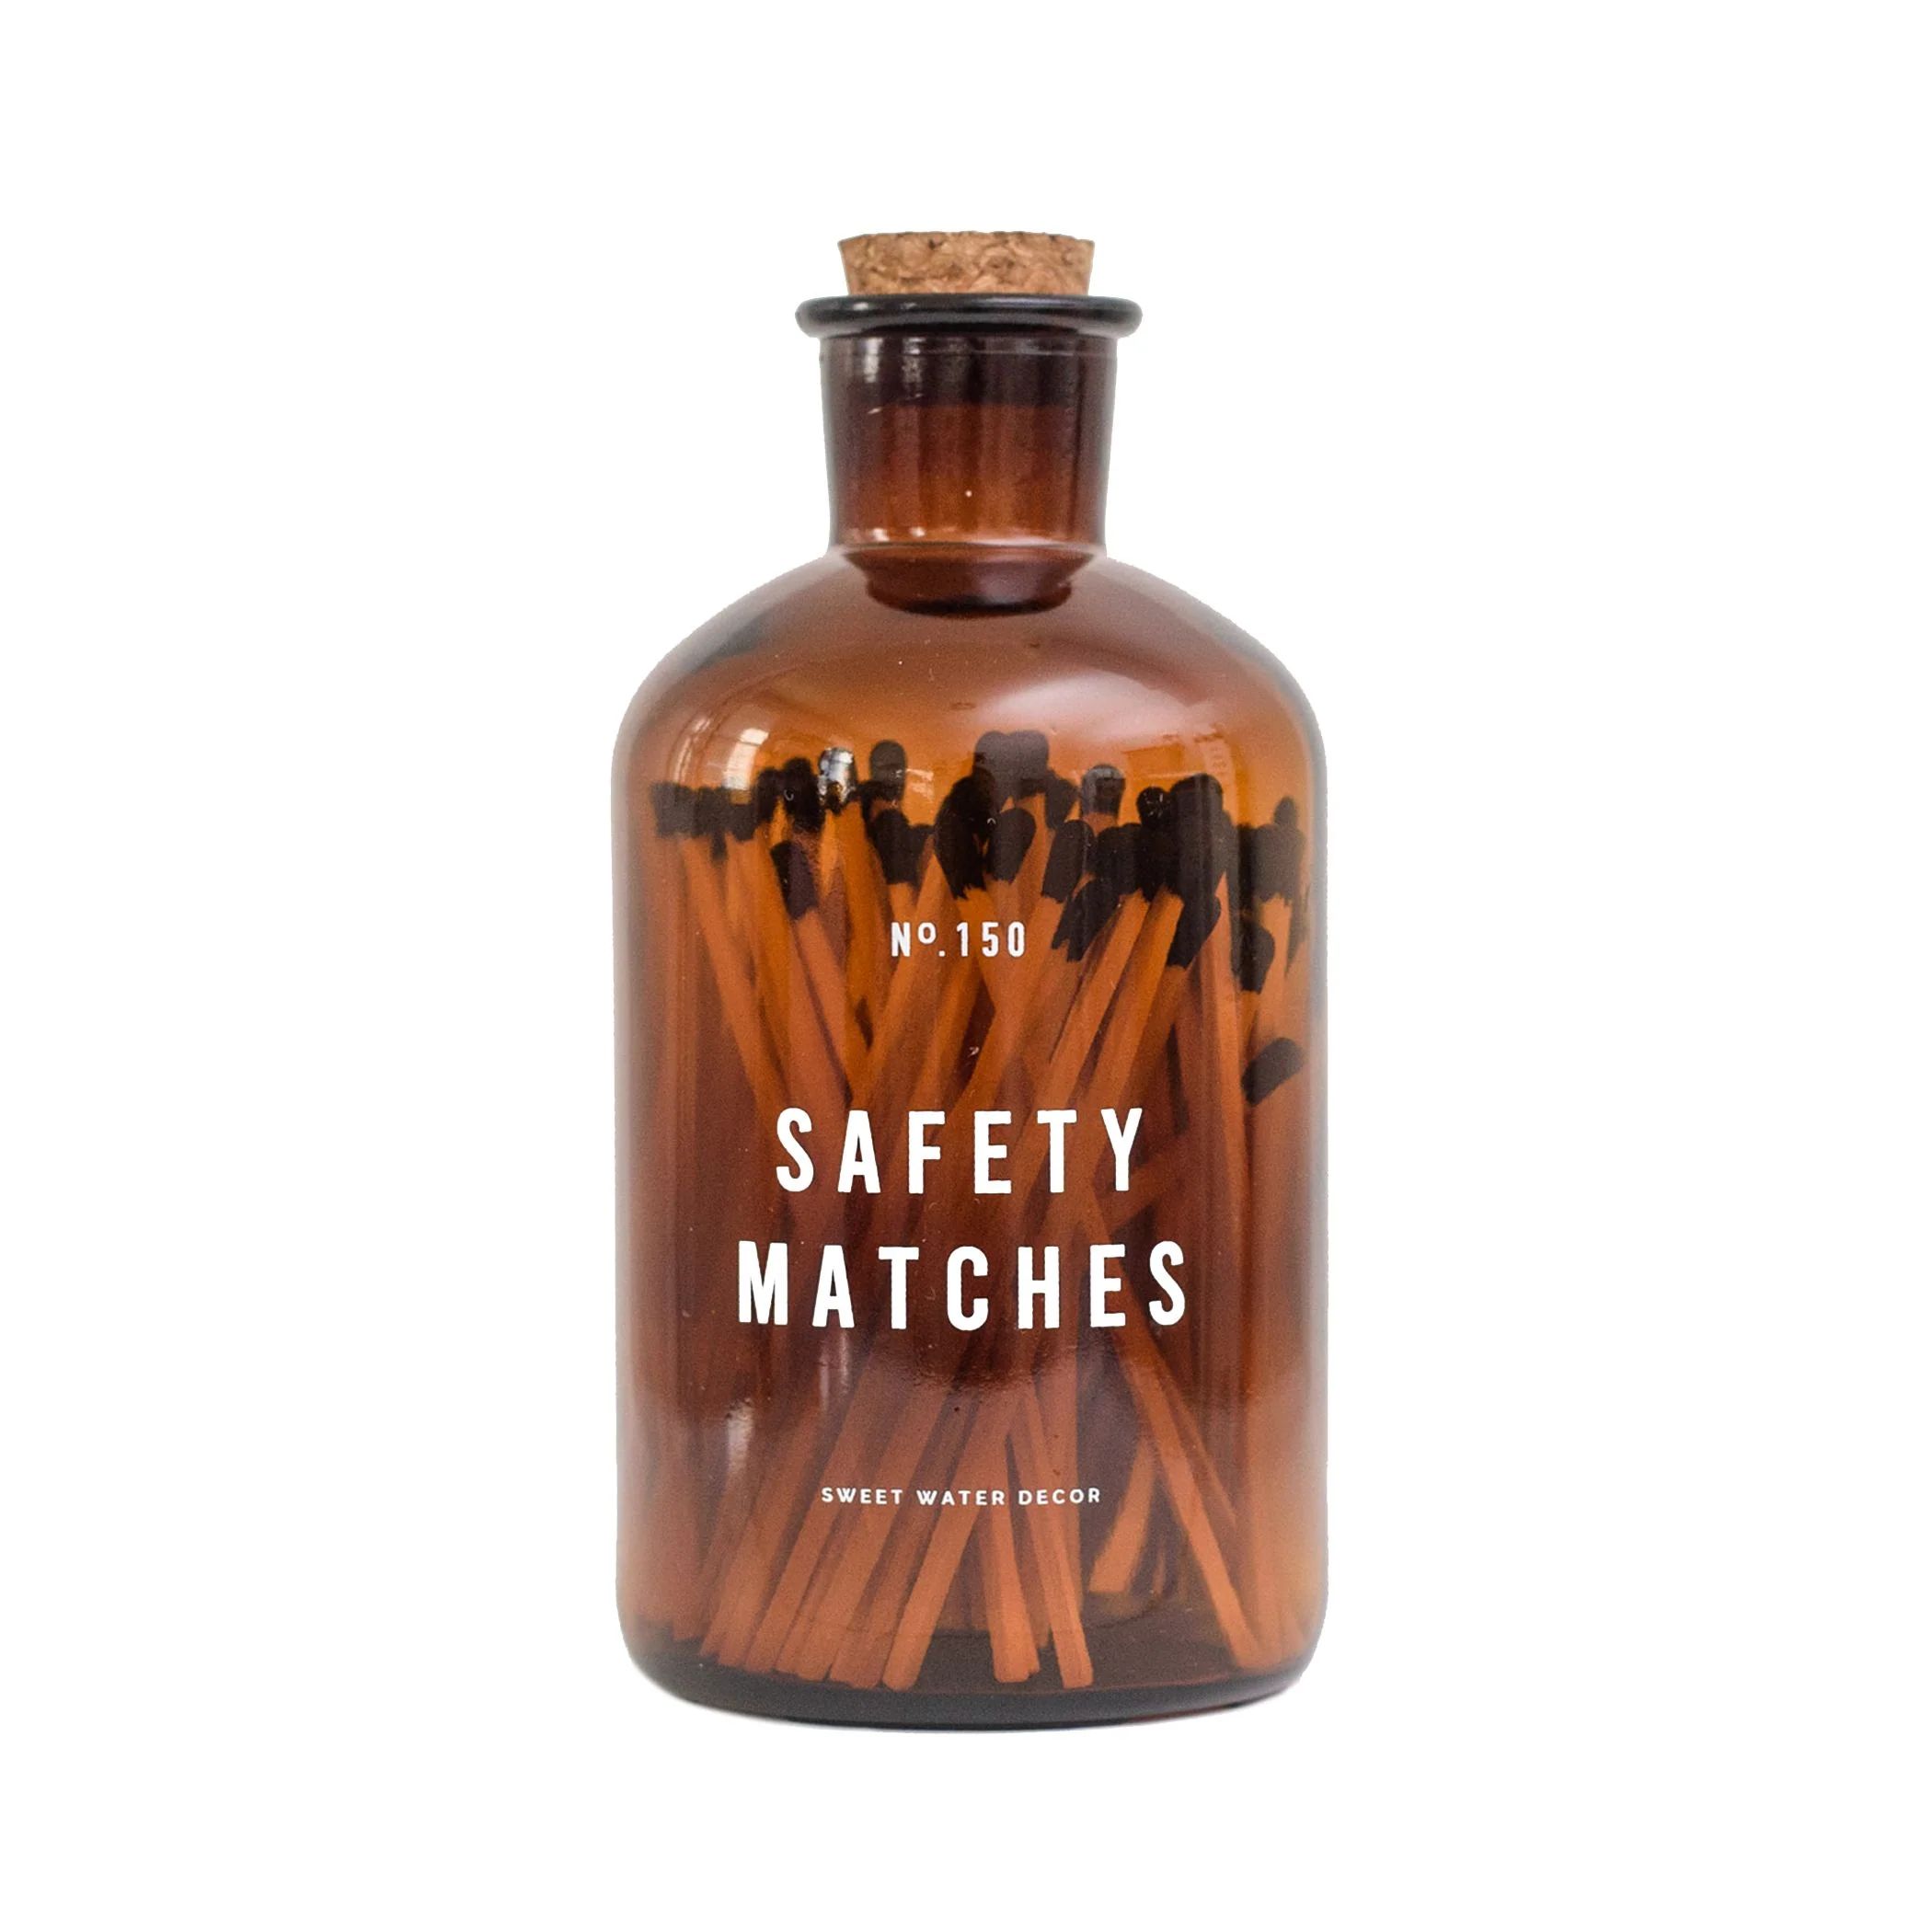 Black Safety Matches - Large Amber Apothecary Jar | Sweet Water Decor, LLC